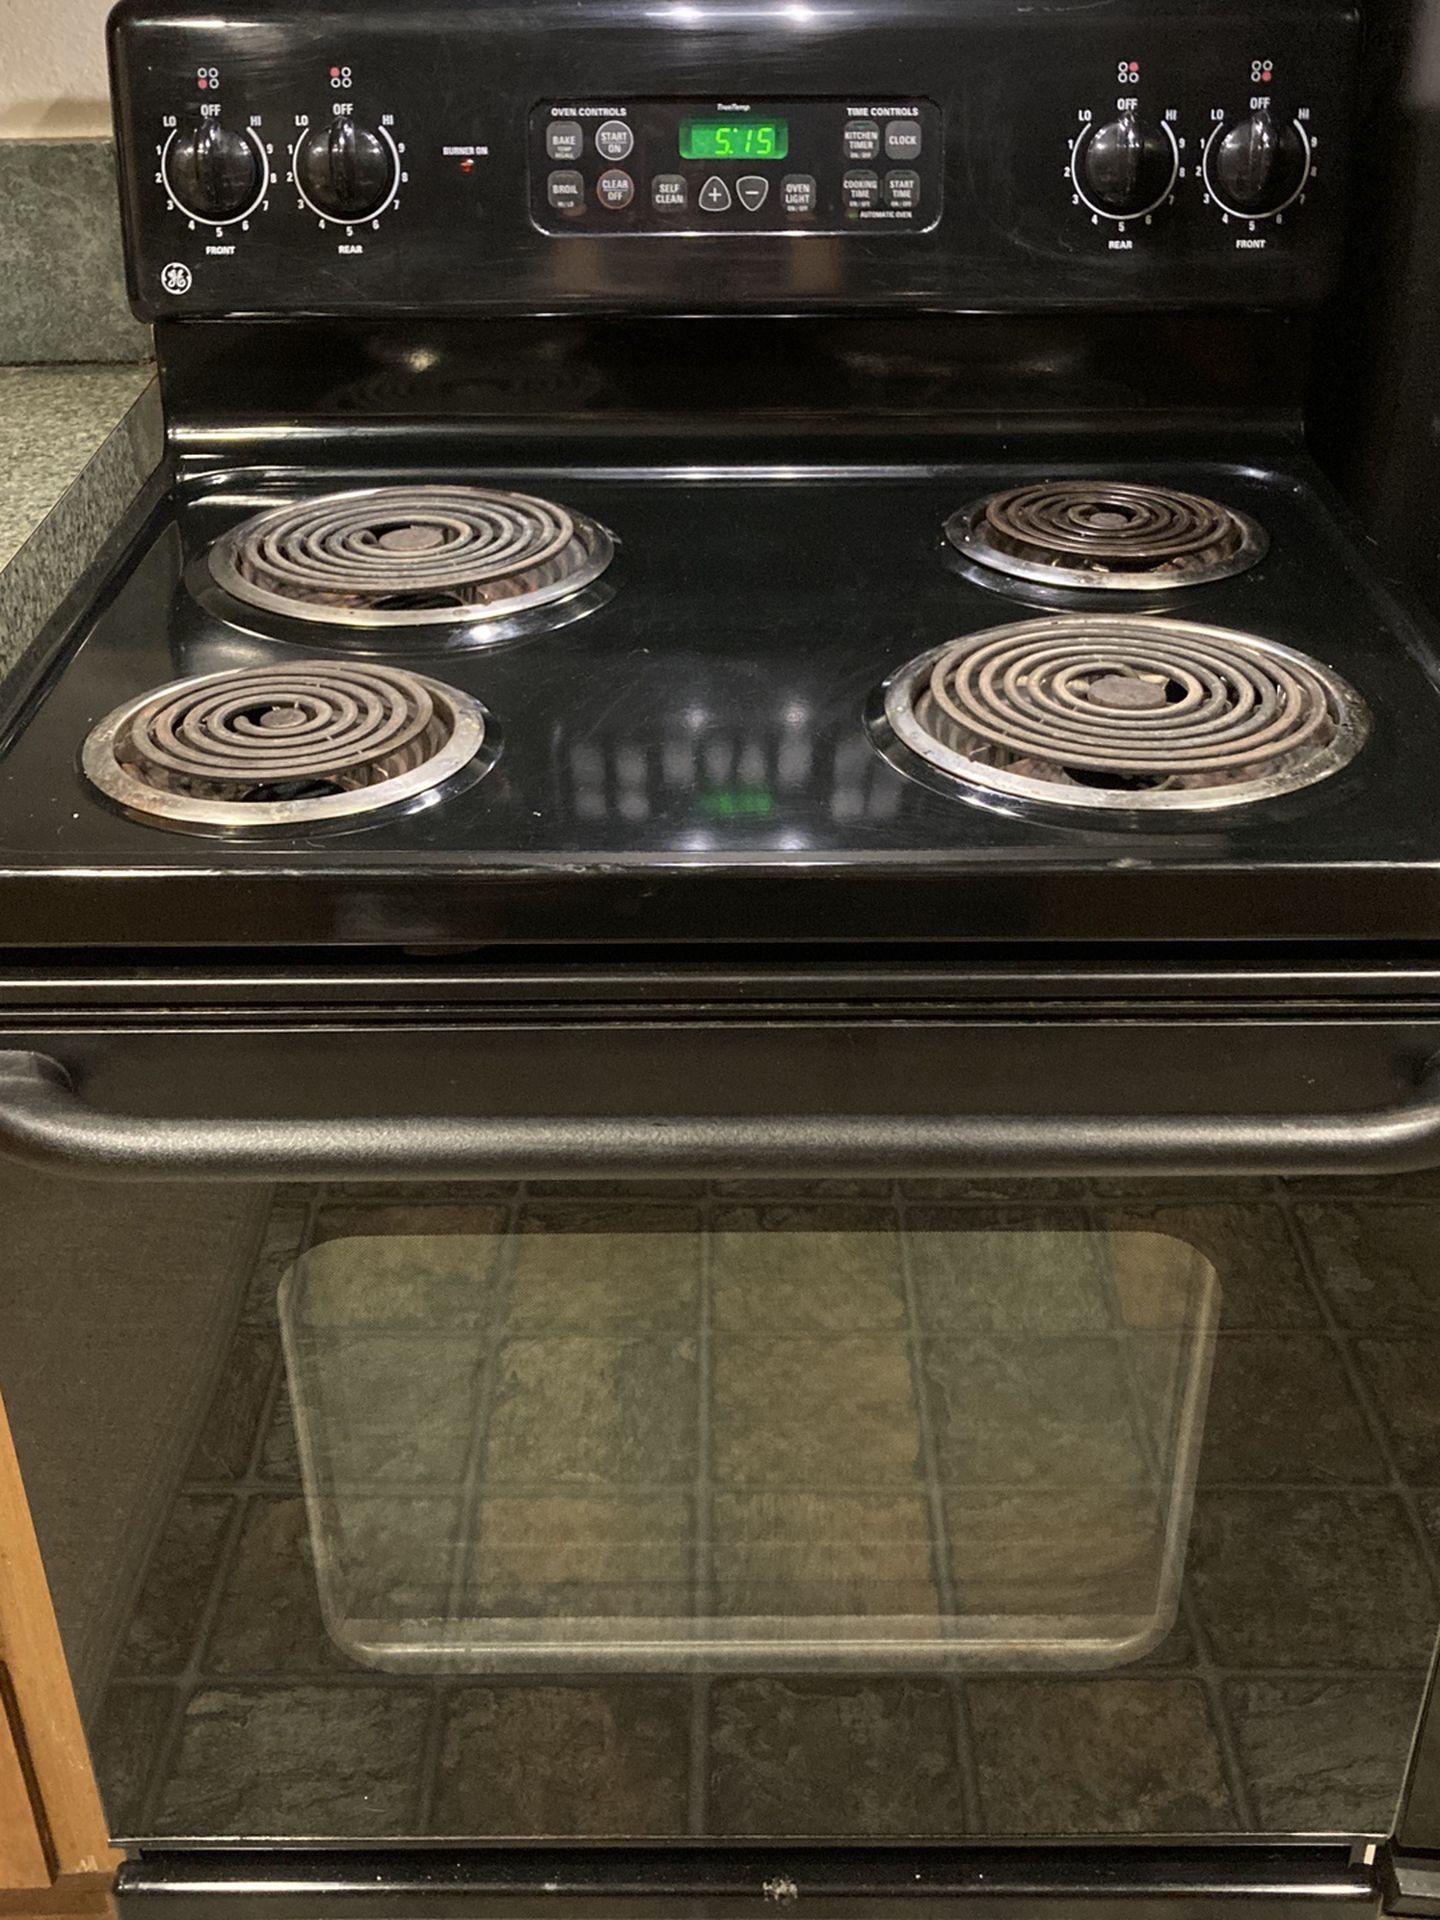 General Electric Stove with Self-Cleaning Oven